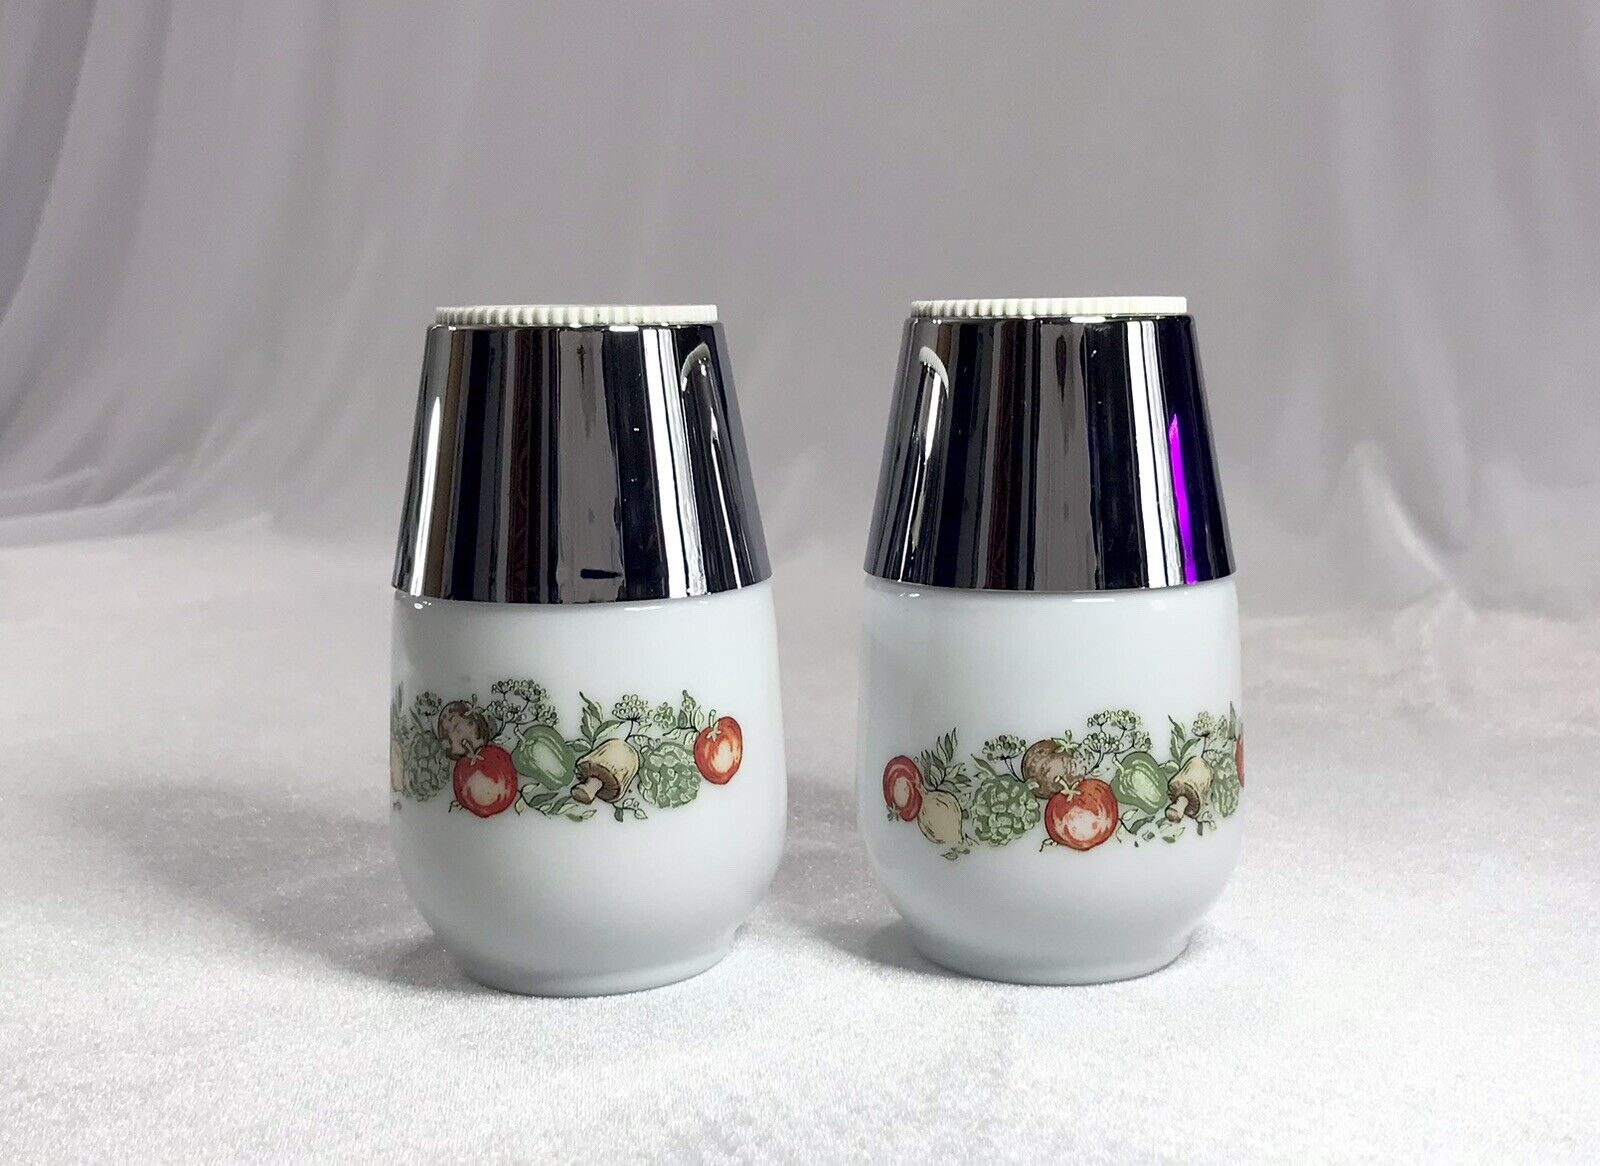 2 Spice of Life 4 oz SPICE SHAKERS Gemco Dial Top Spice Range Set